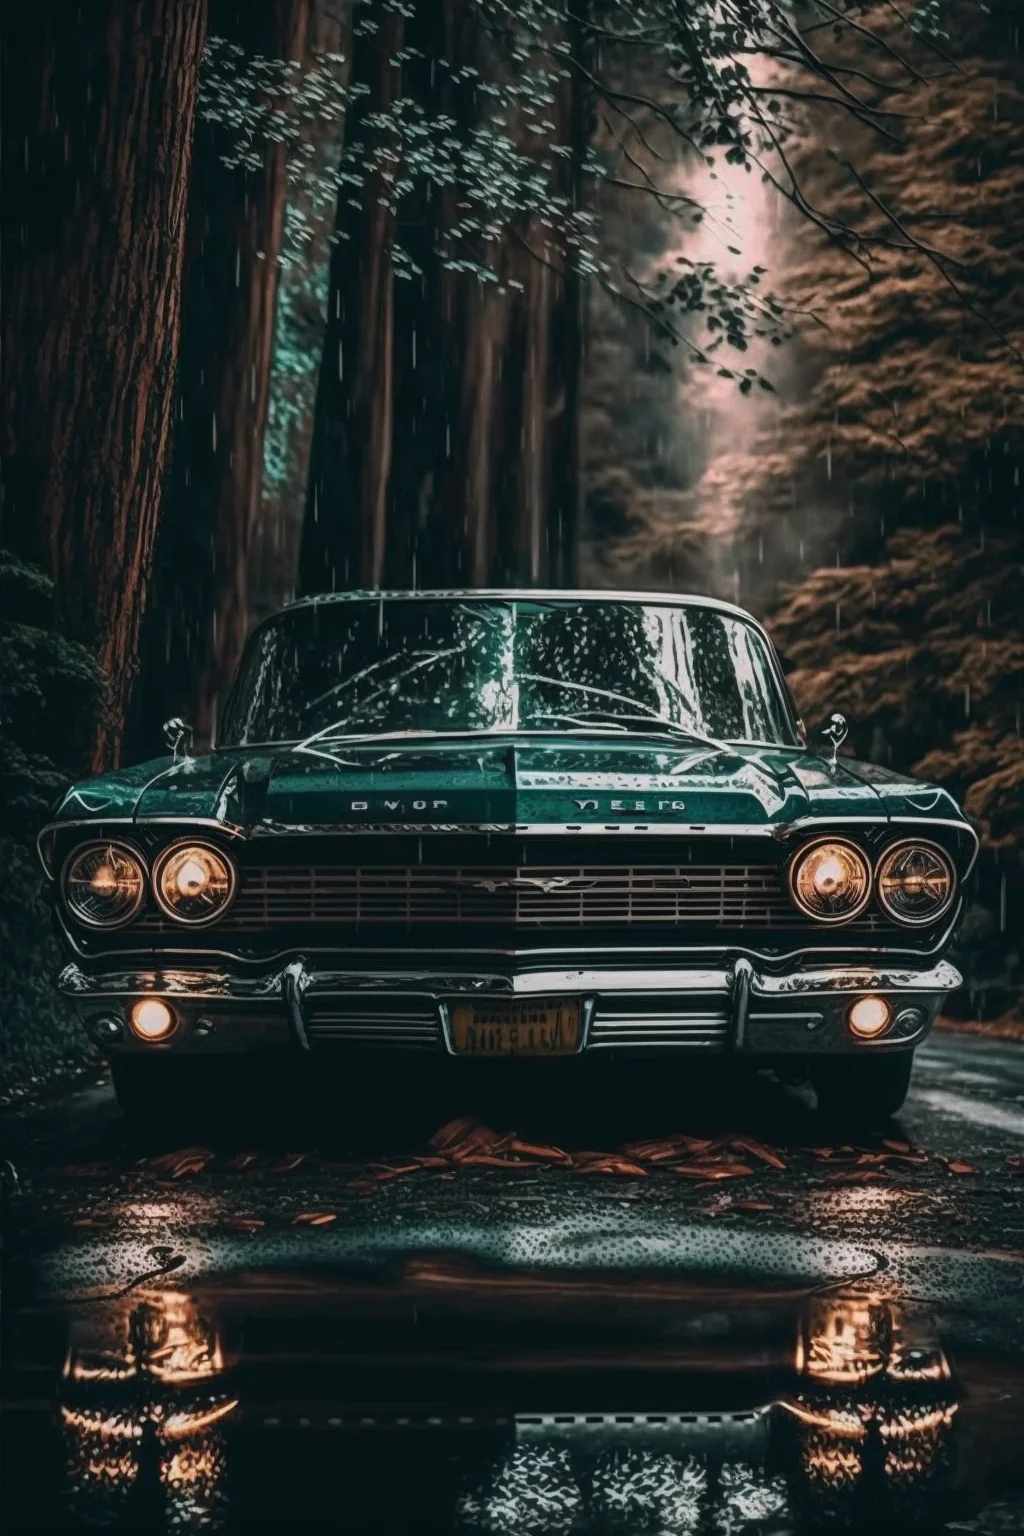 A green classic car parked in the rain. - Modern, technology, cars